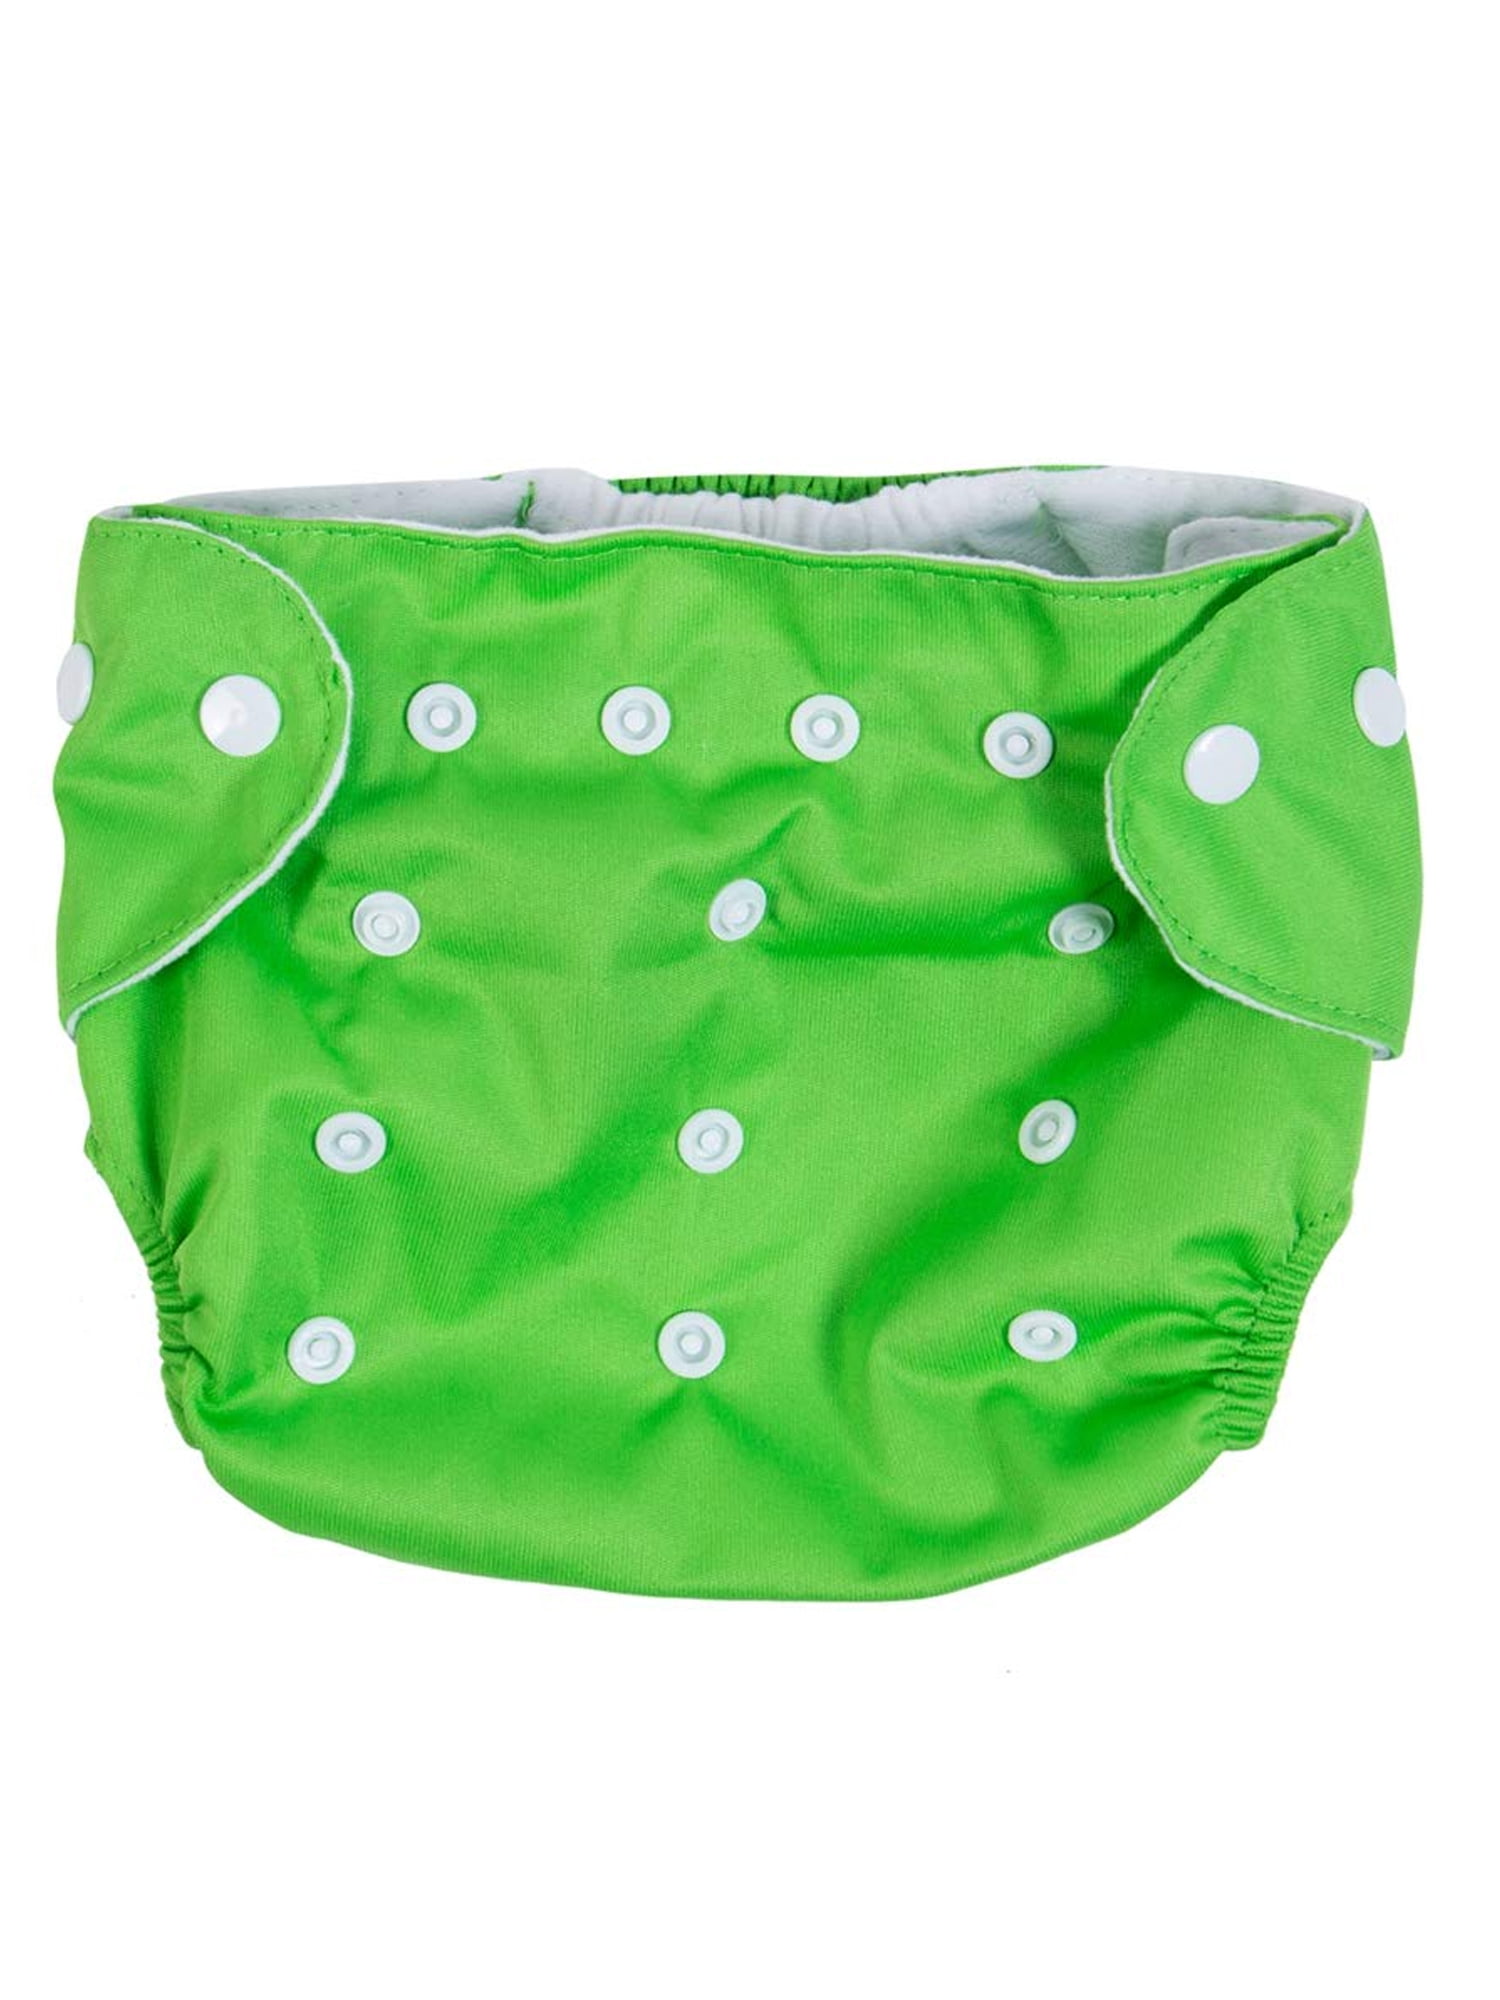 PRENKIN Reuseable Washable Adjustable One Size Baby Pocket Cloth Diapers Nappy